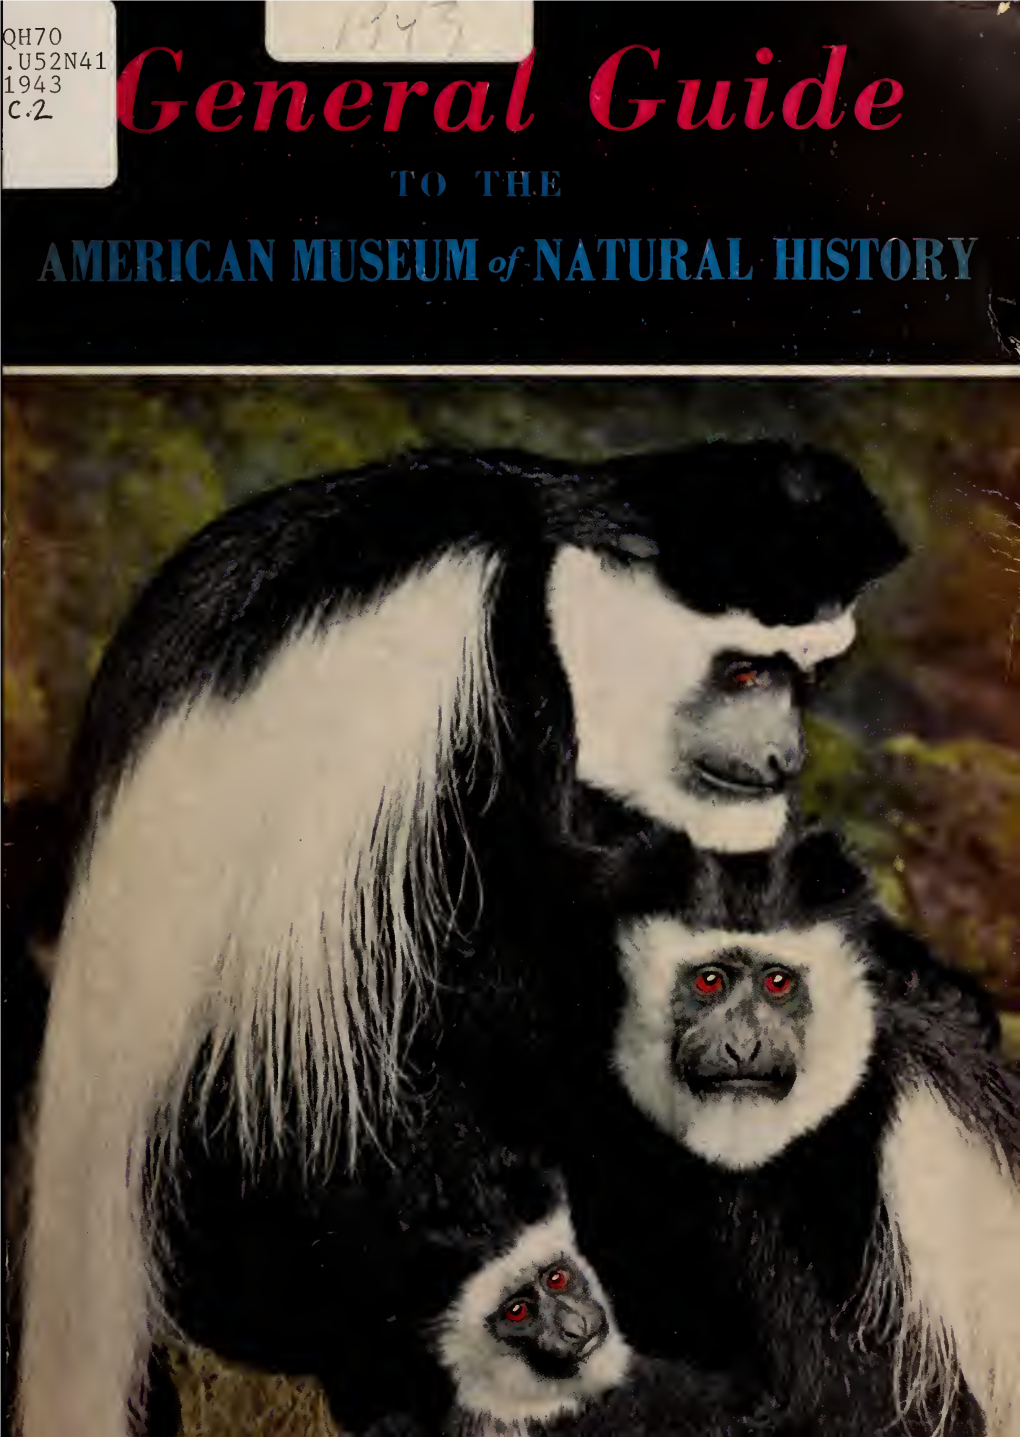 General Guide to the Exhibition Halls of the AMERICAN MUSEUM of NATURAL HISTORY